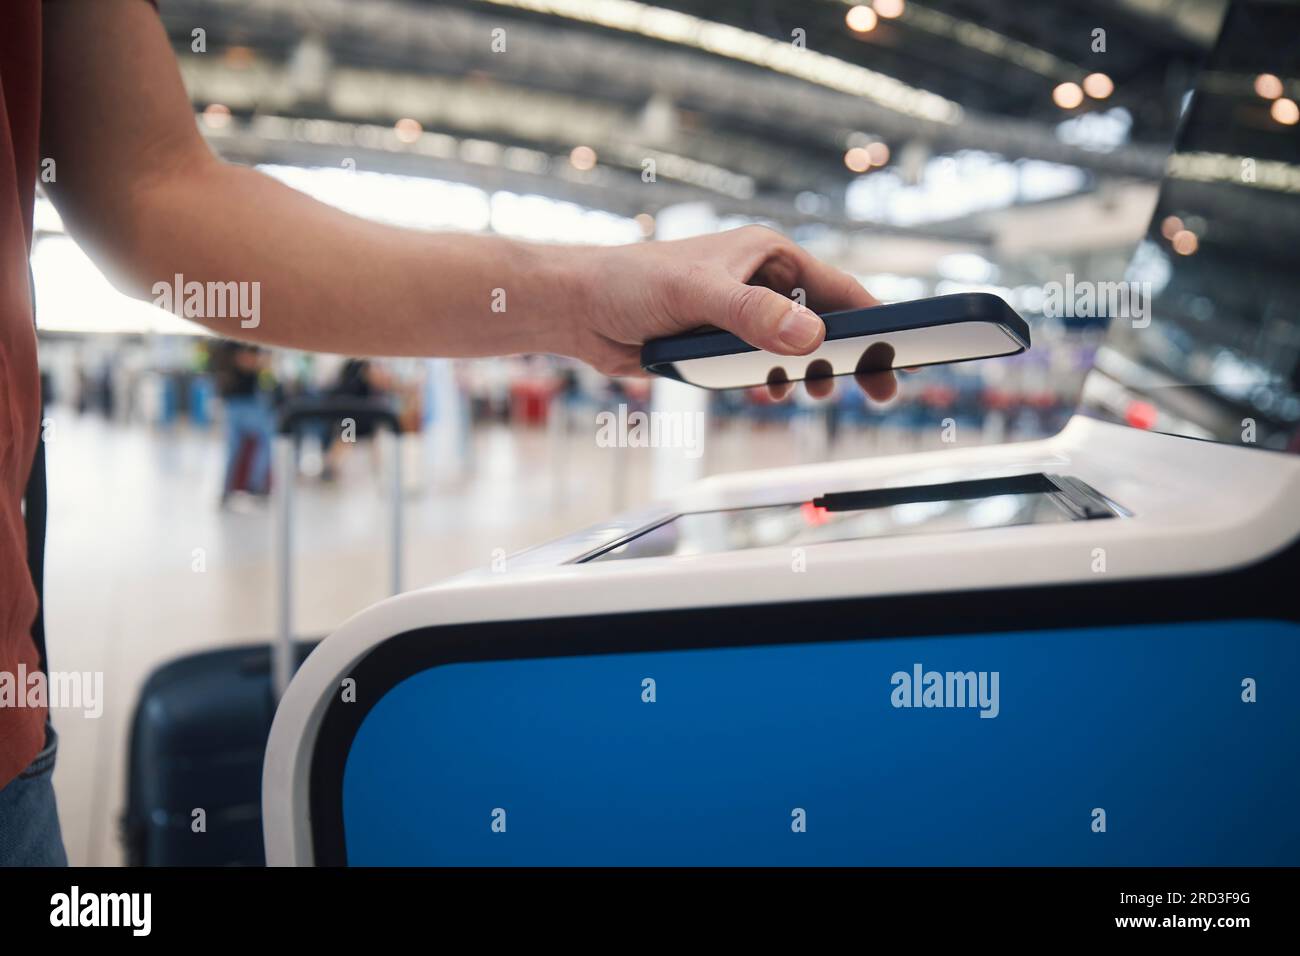 Hand of man during using self service check-in machine. Passenger scanning ticket on smart phone at airport terminal. Stock Photo